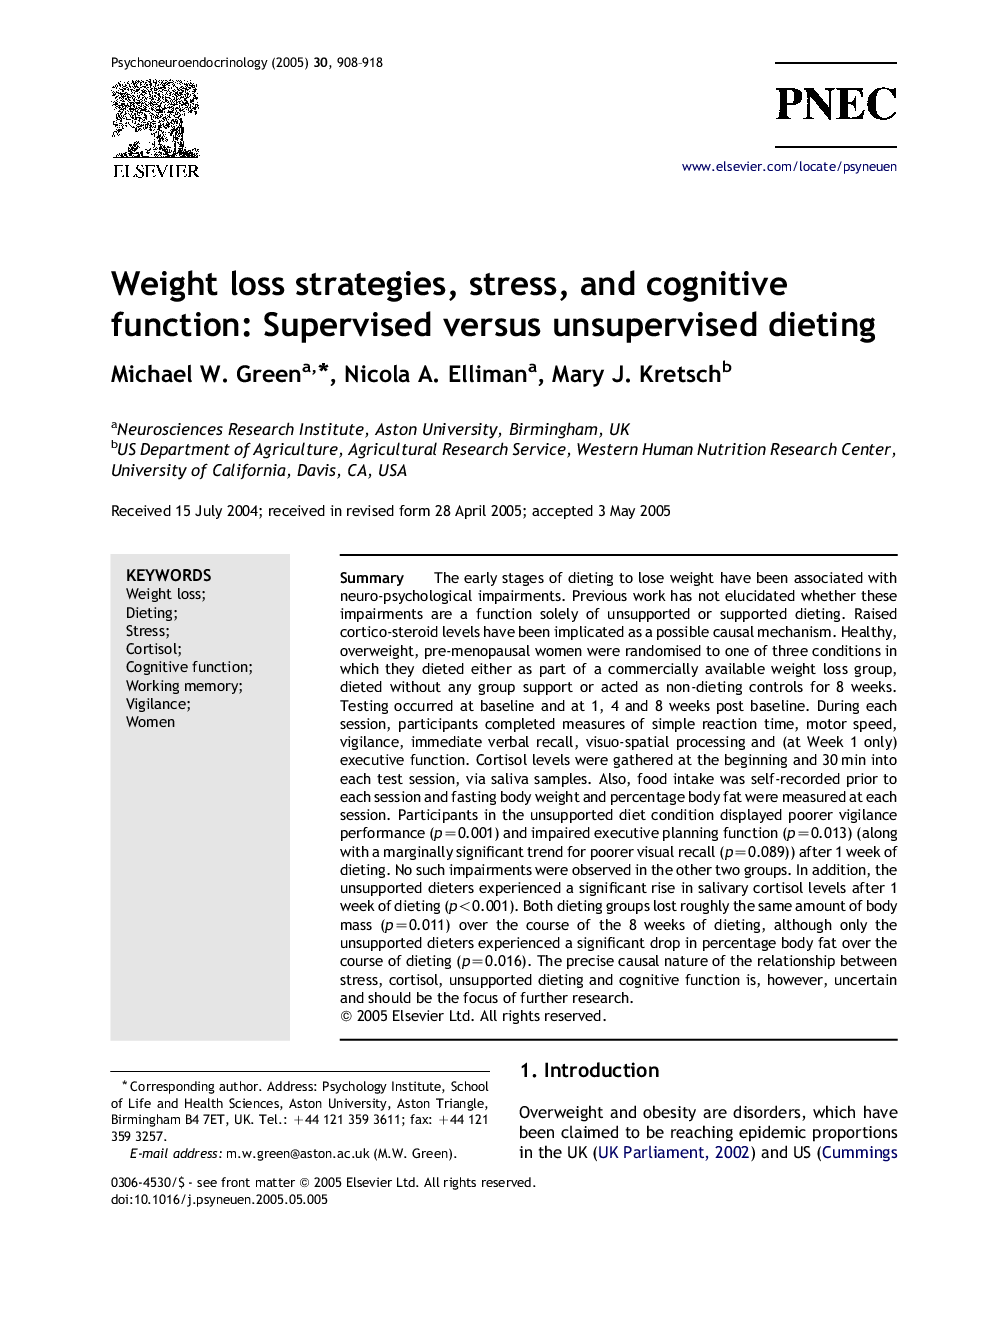 Weight loss strategies, stress, and cognitive function: Supervised versus unsupervised dieting